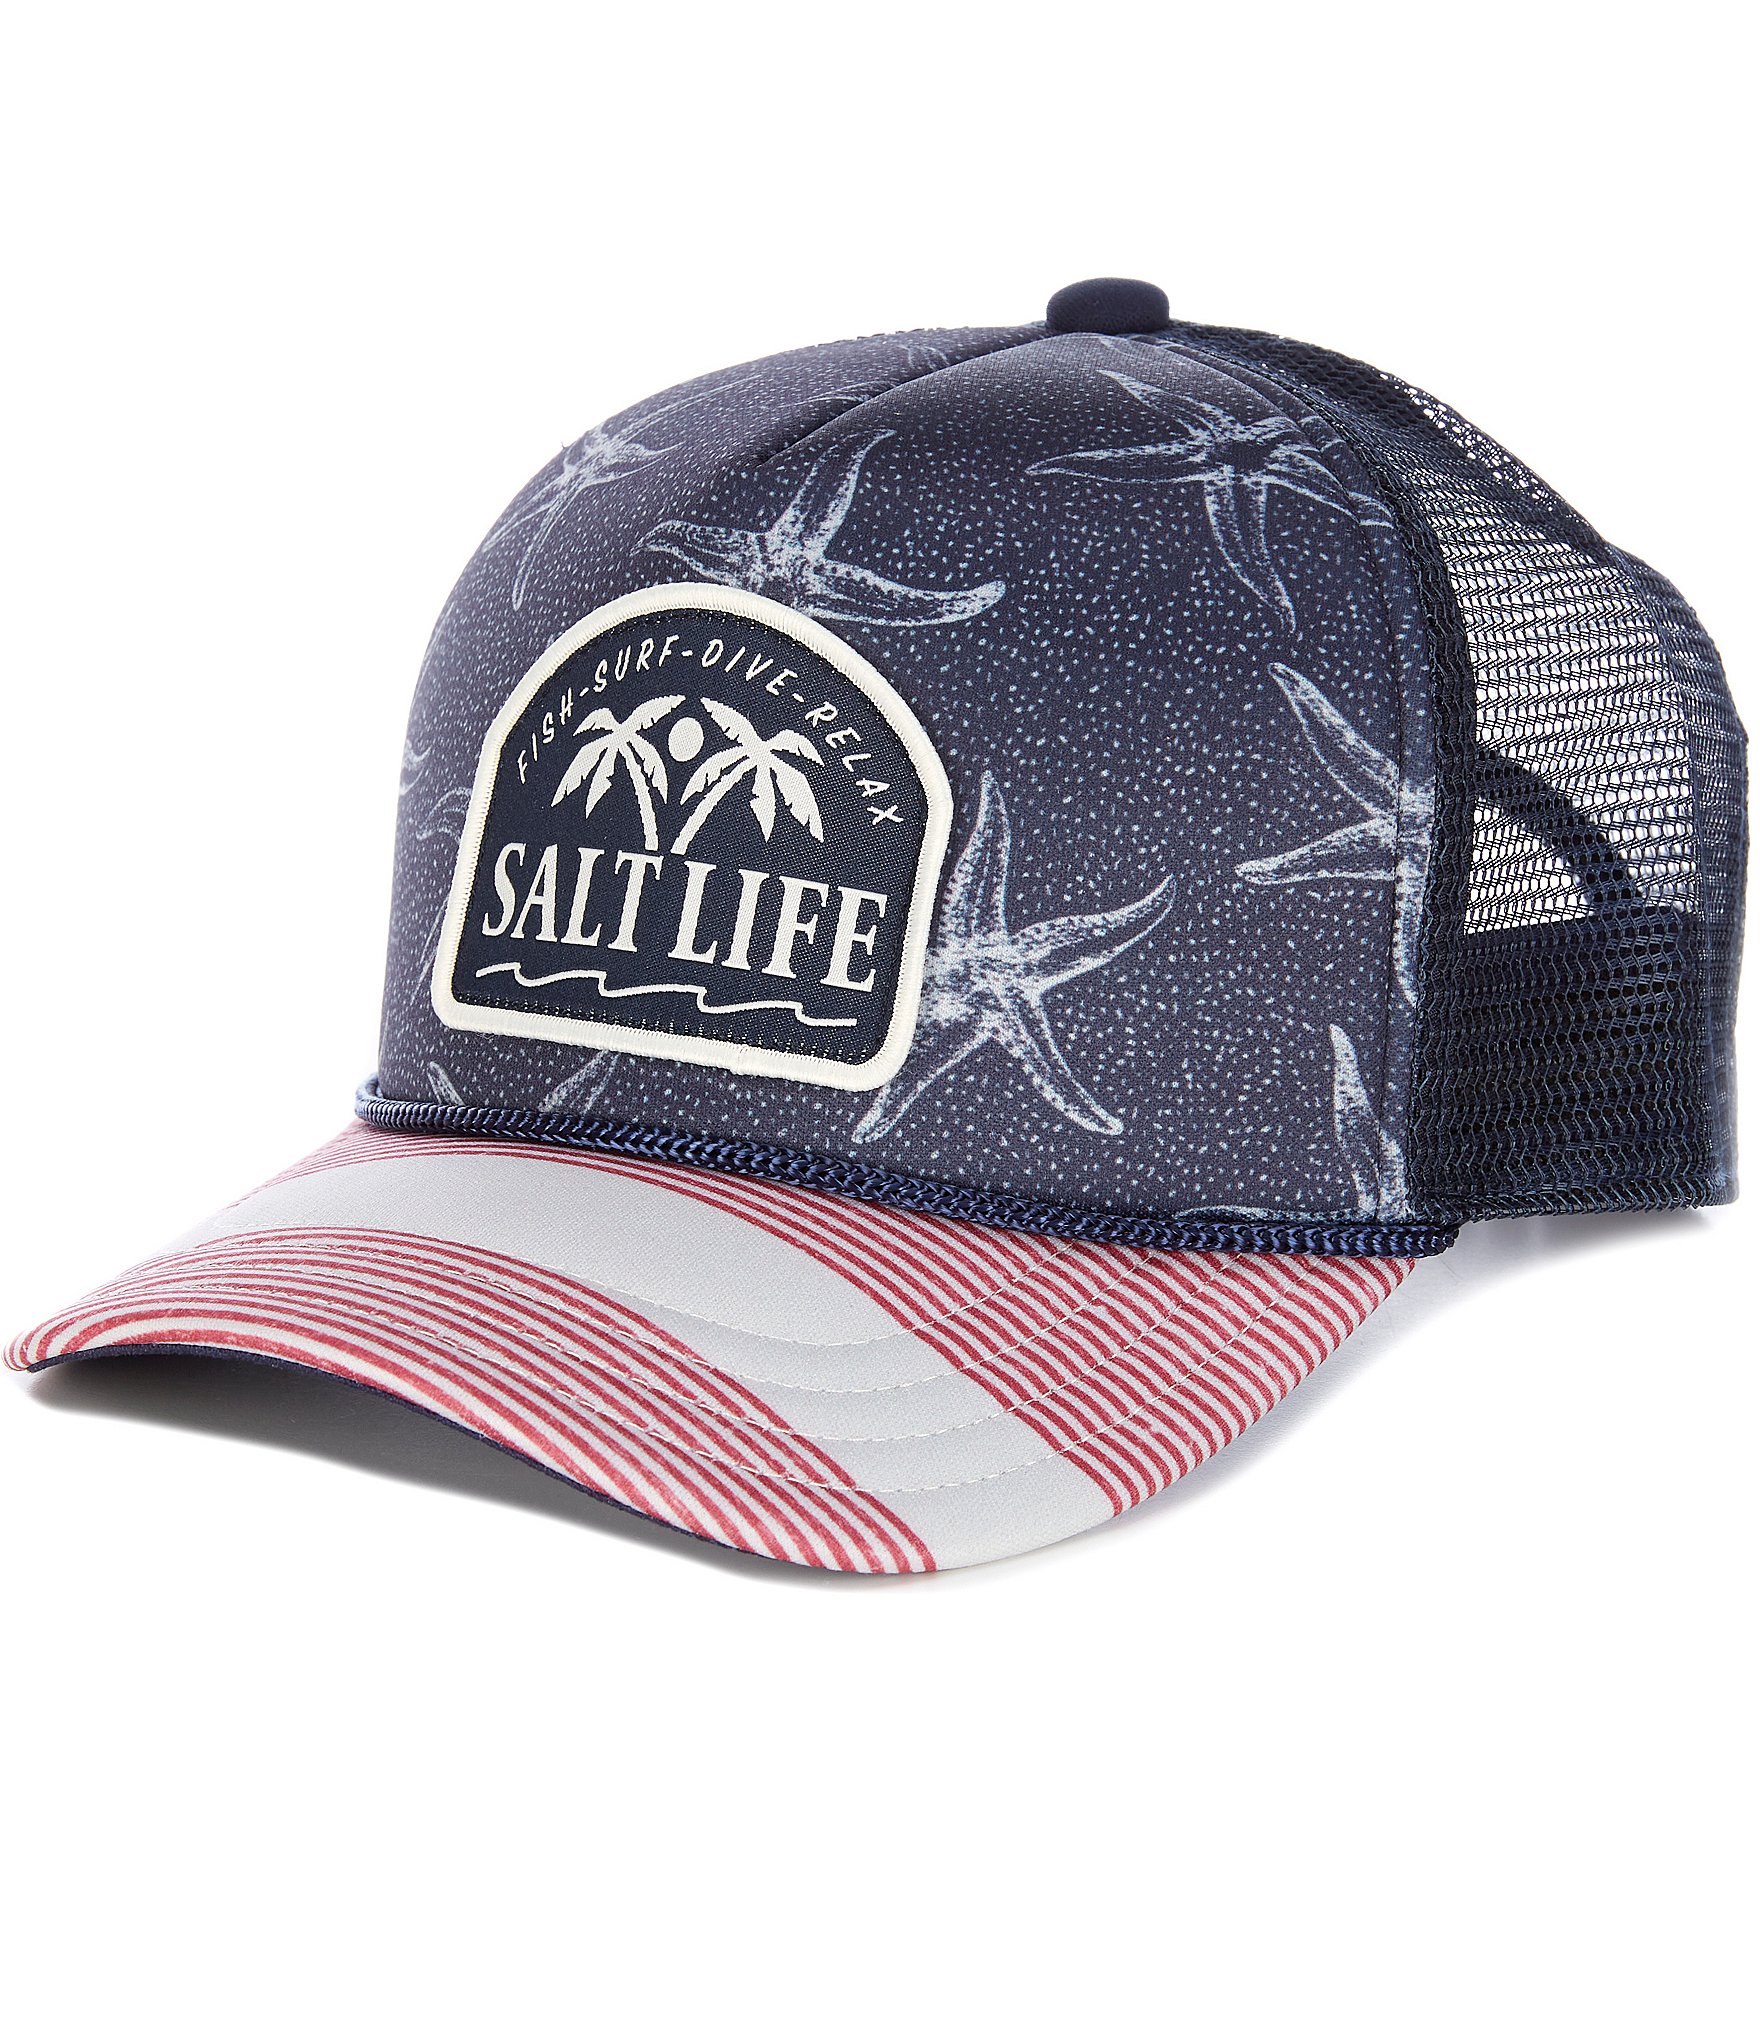 Wholesale Unisex Sublimation Blank Trucker Hat Kids Youth Adults